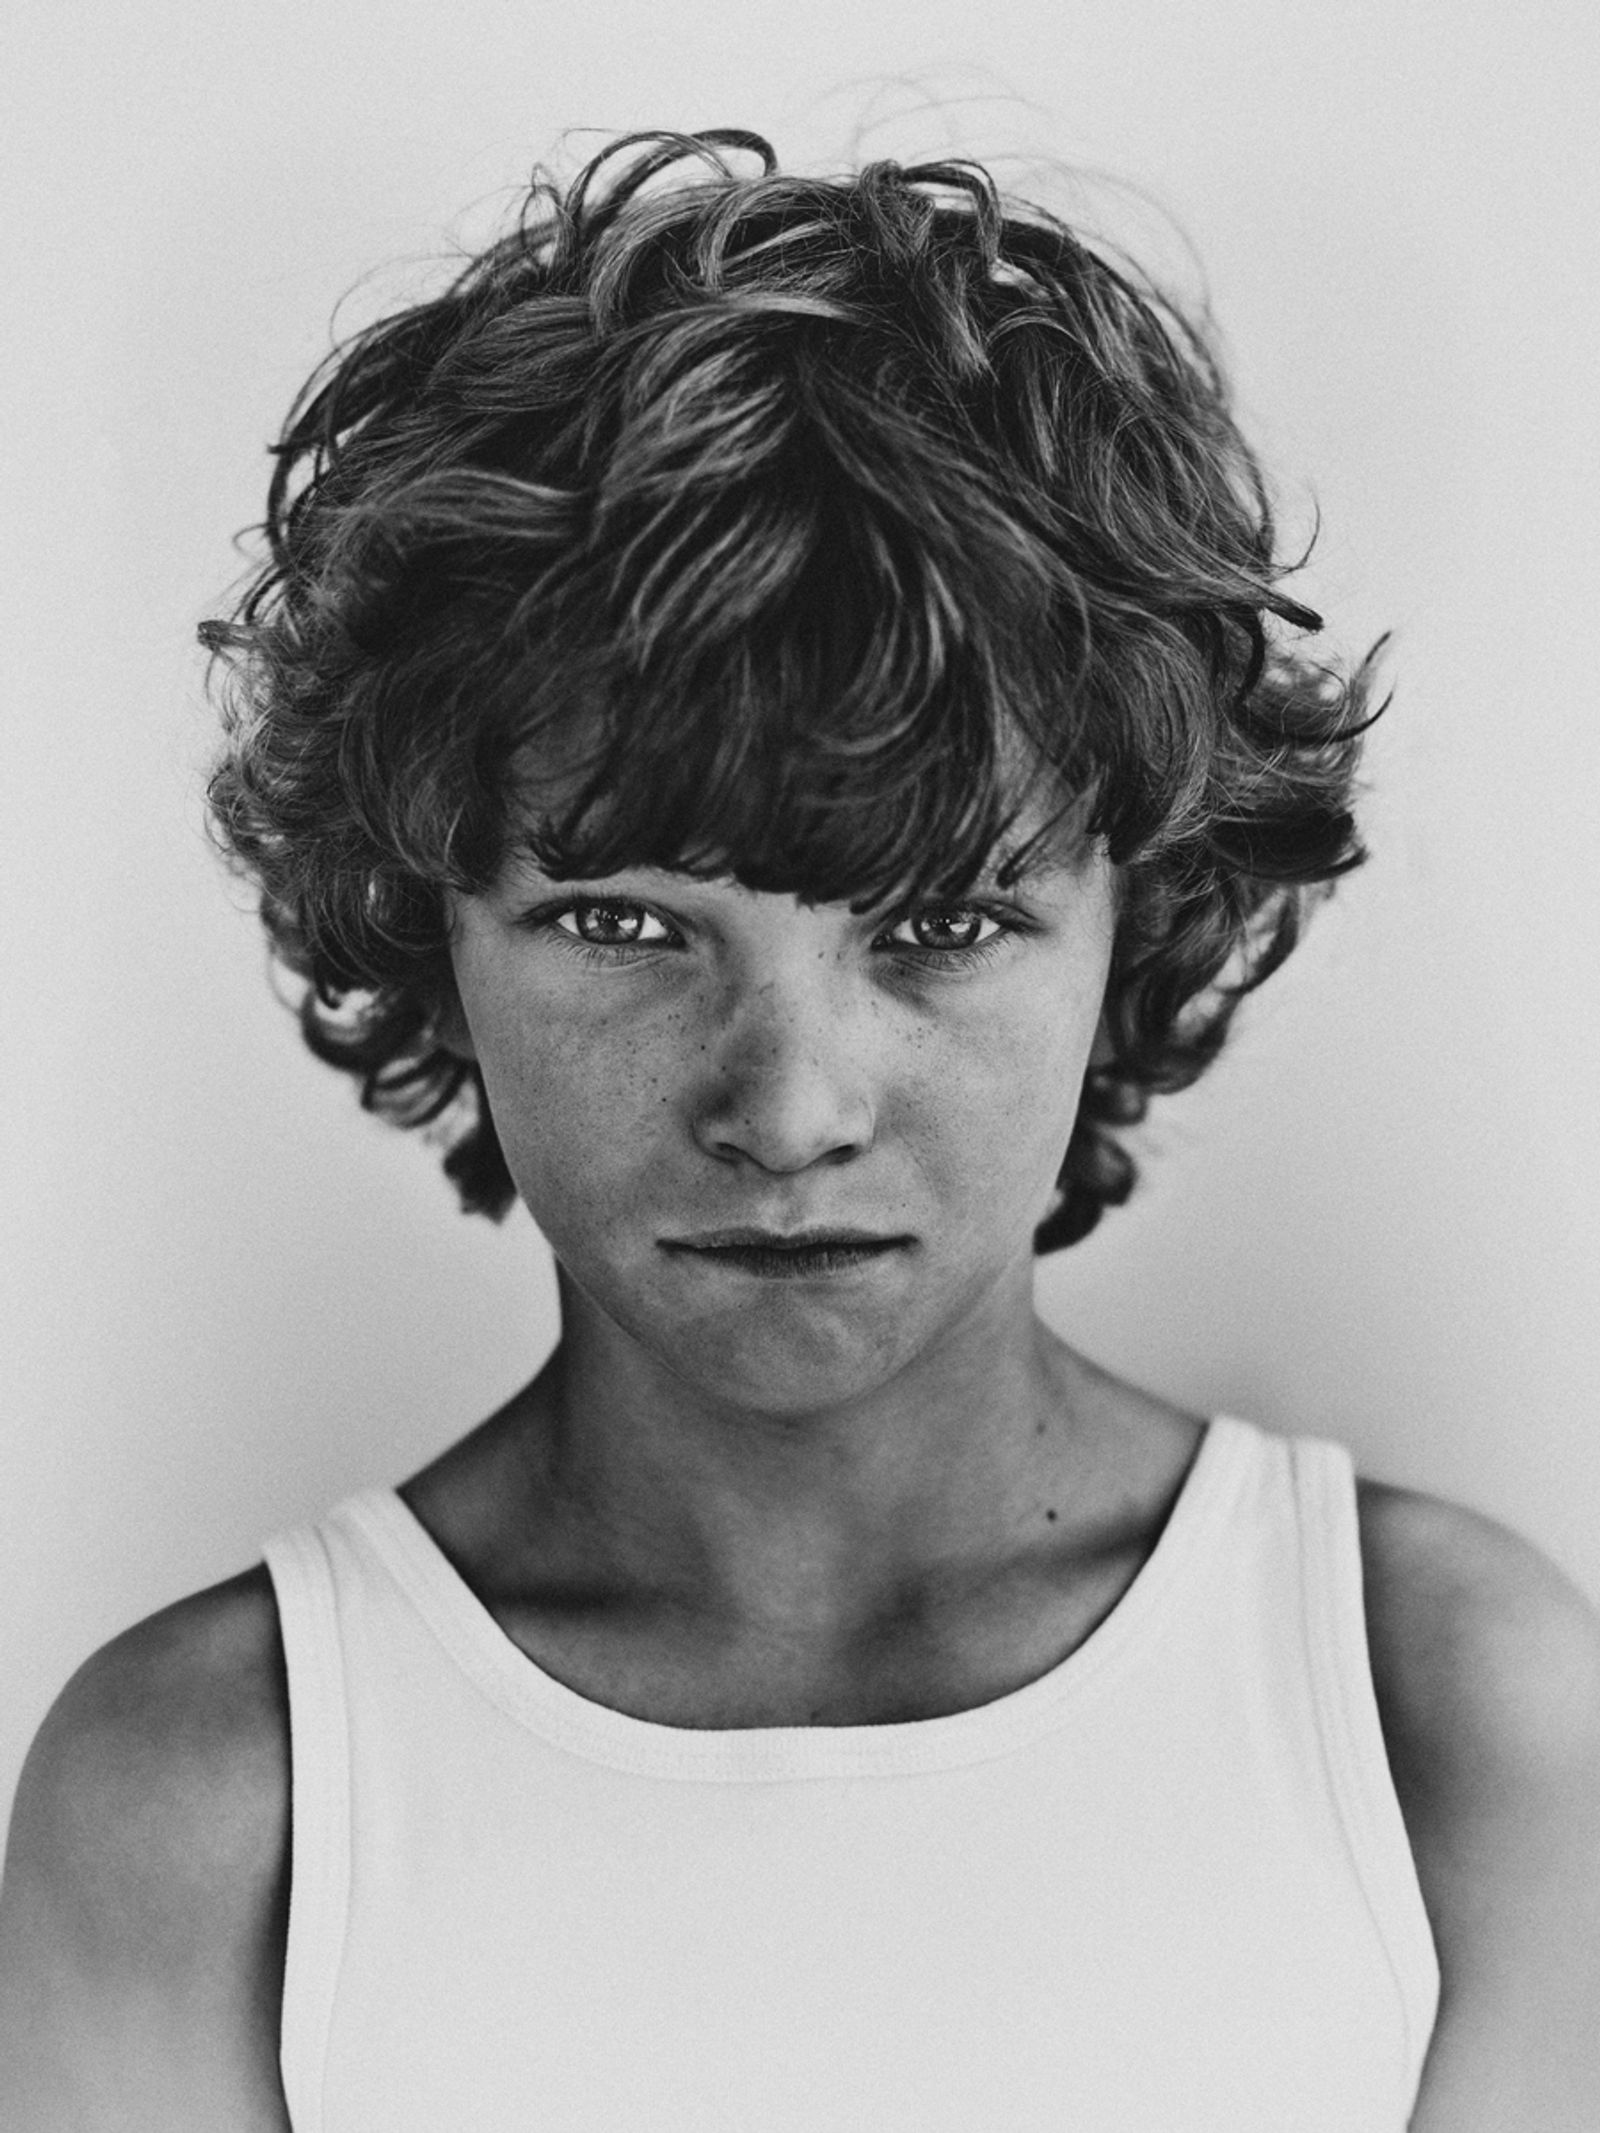 © Bastiaan Woudt - Image from the Amsterdam Portraits photography project